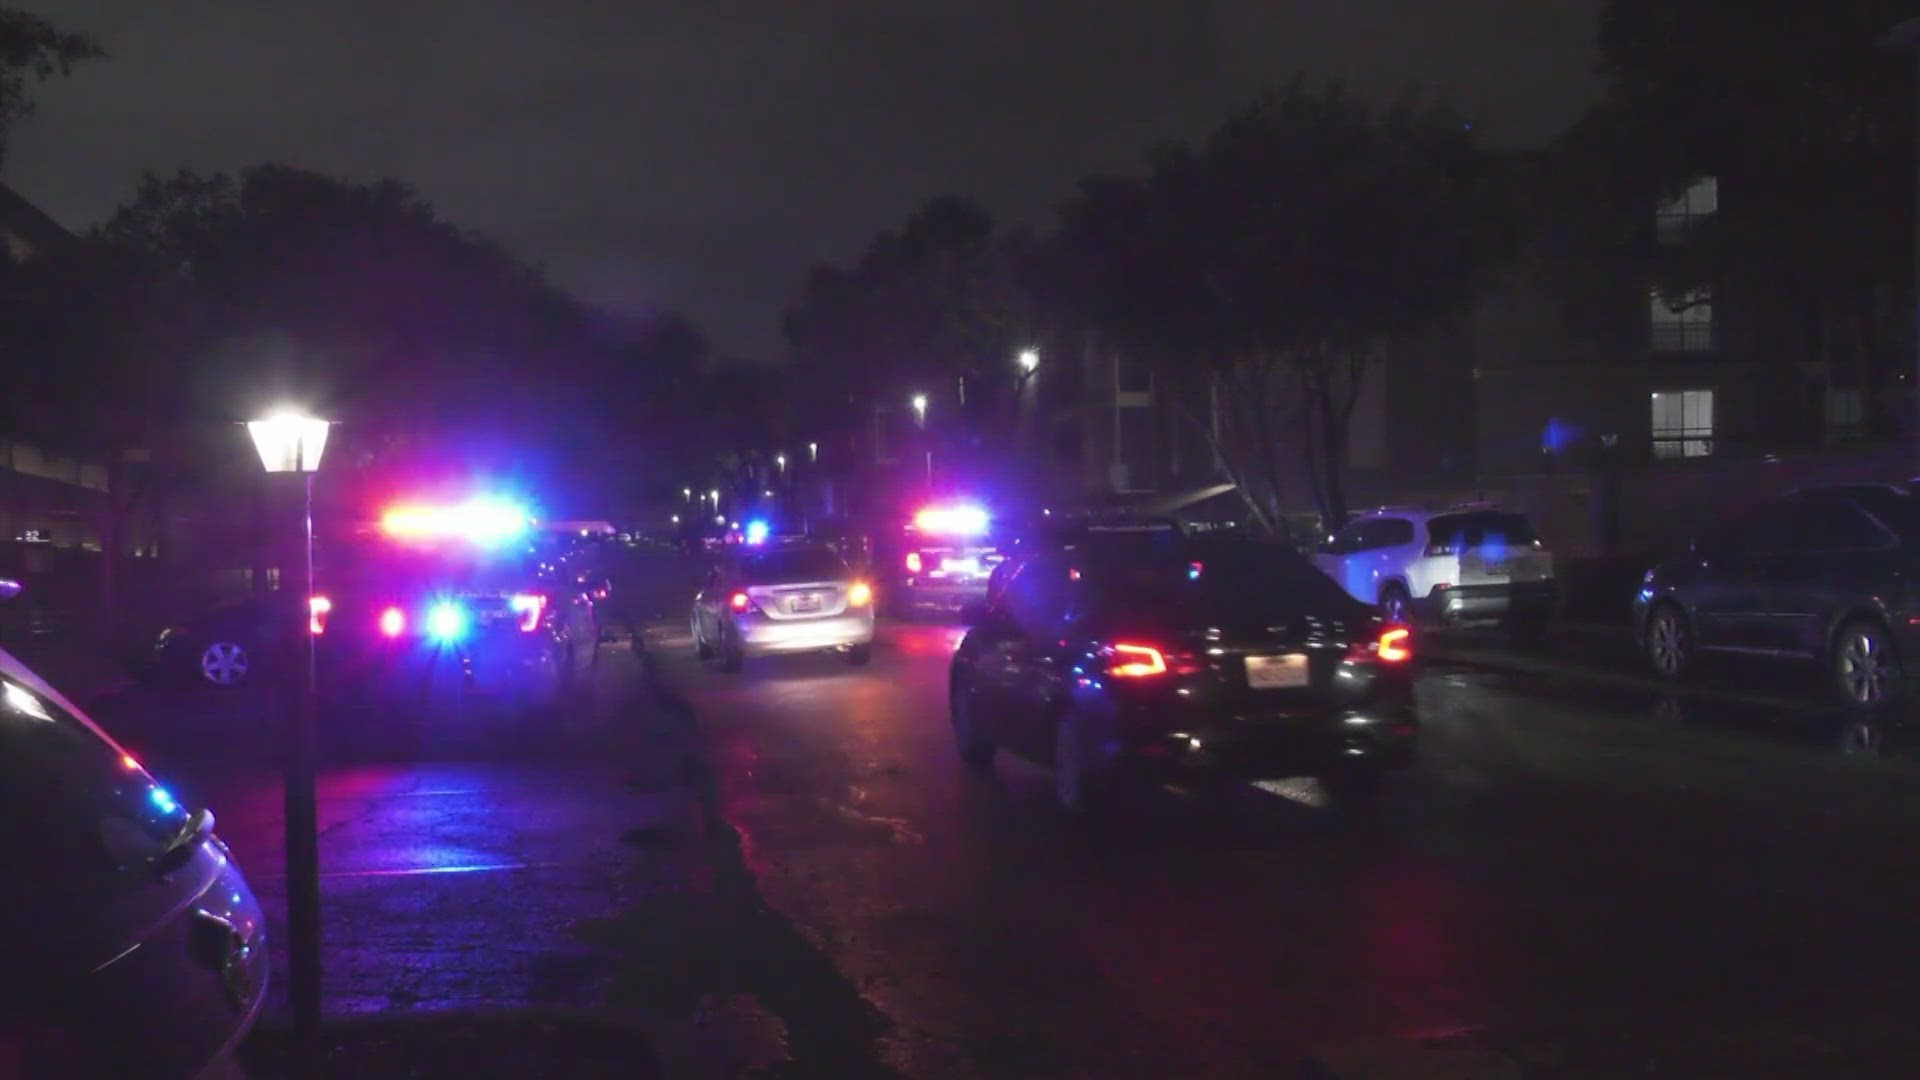 Houston police said a woman was detained after shooting a man several times Thursday night at their apartment in the Galleria area.